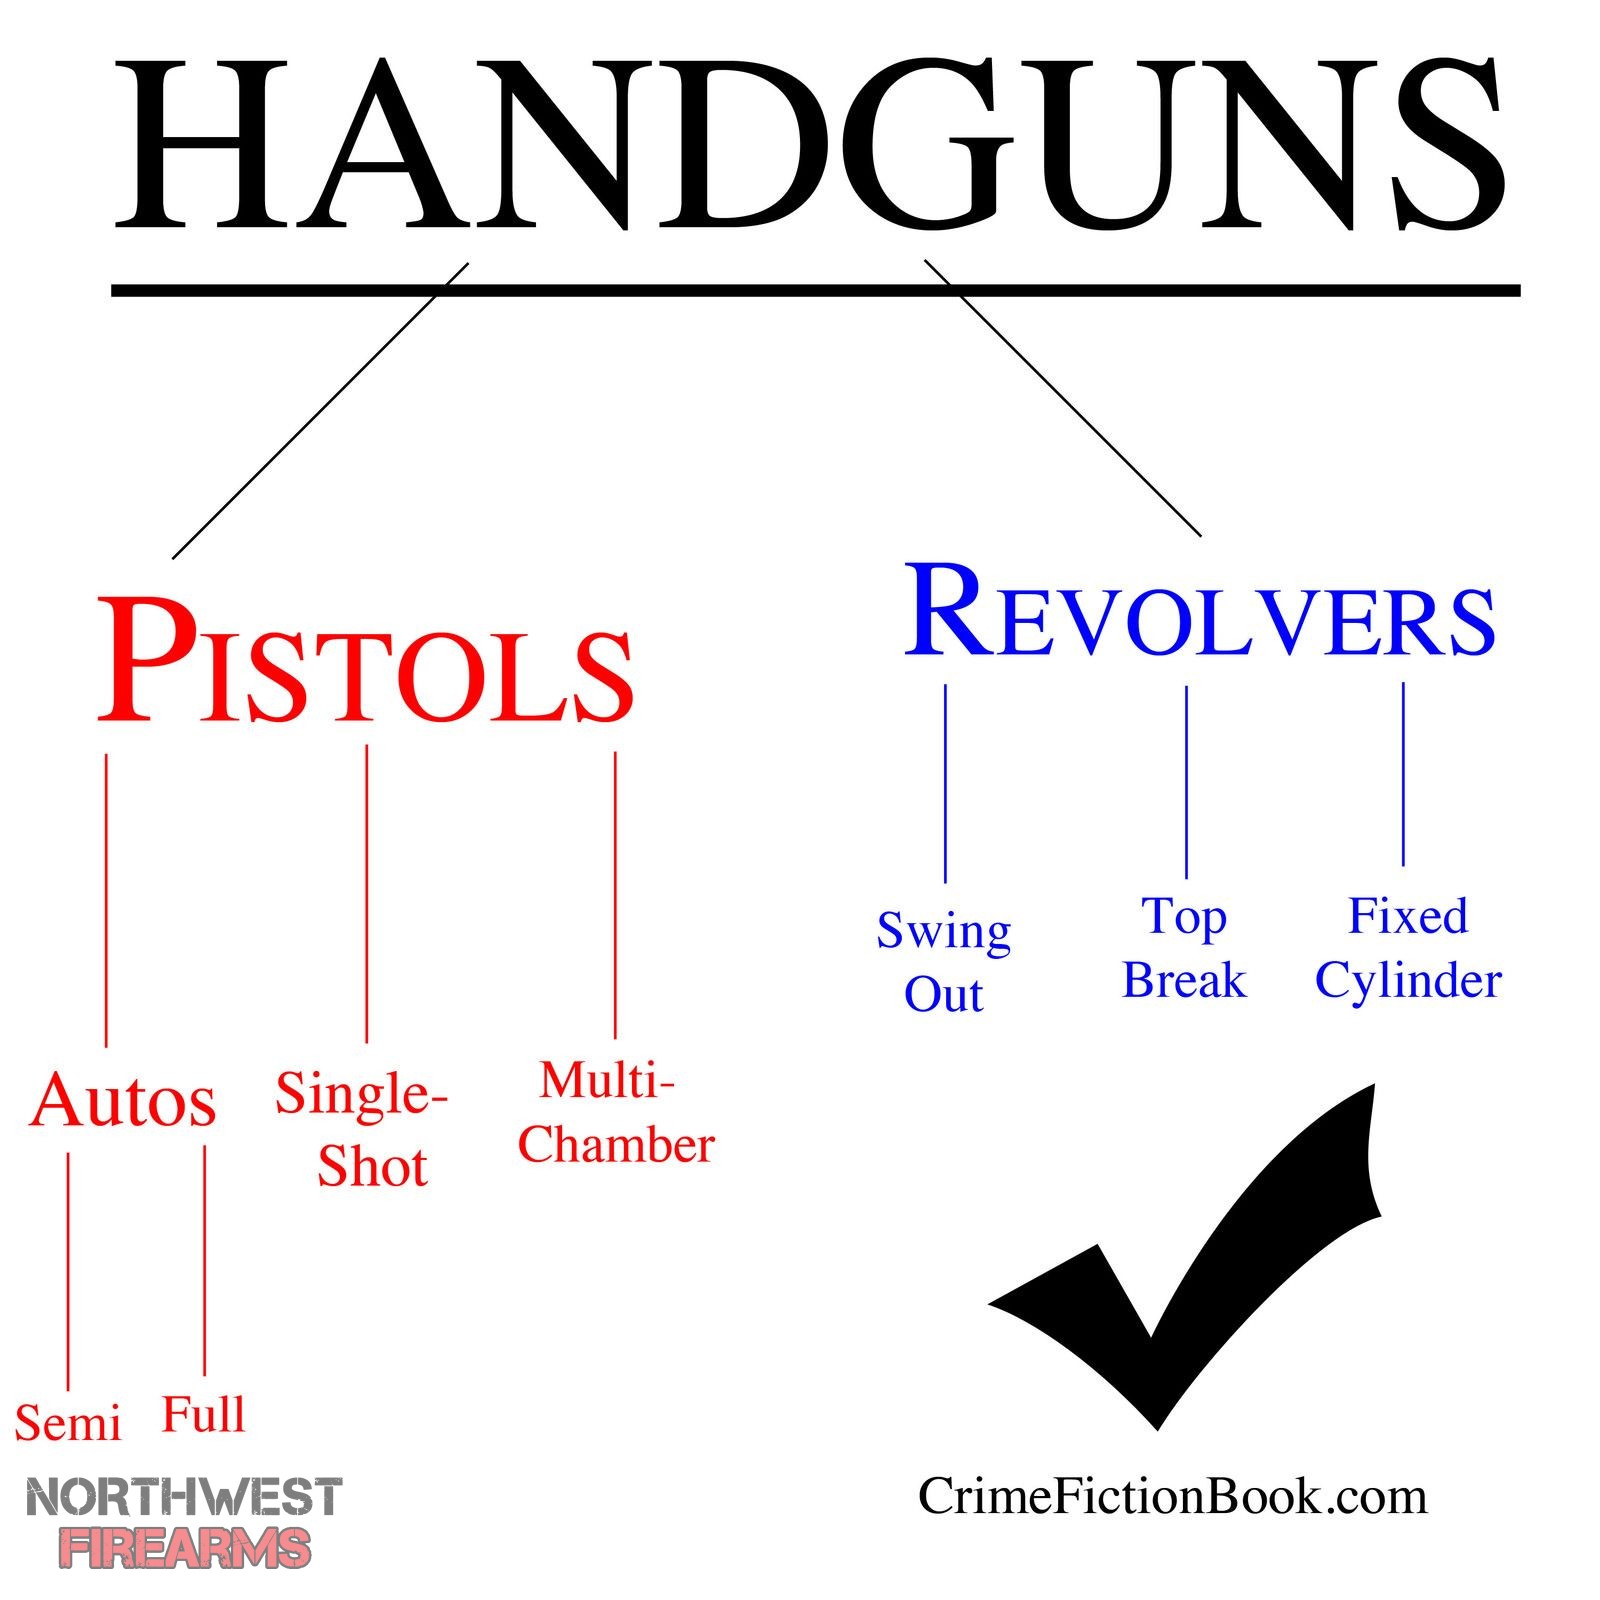 differences-between-revolvers-and-pistols.jpg